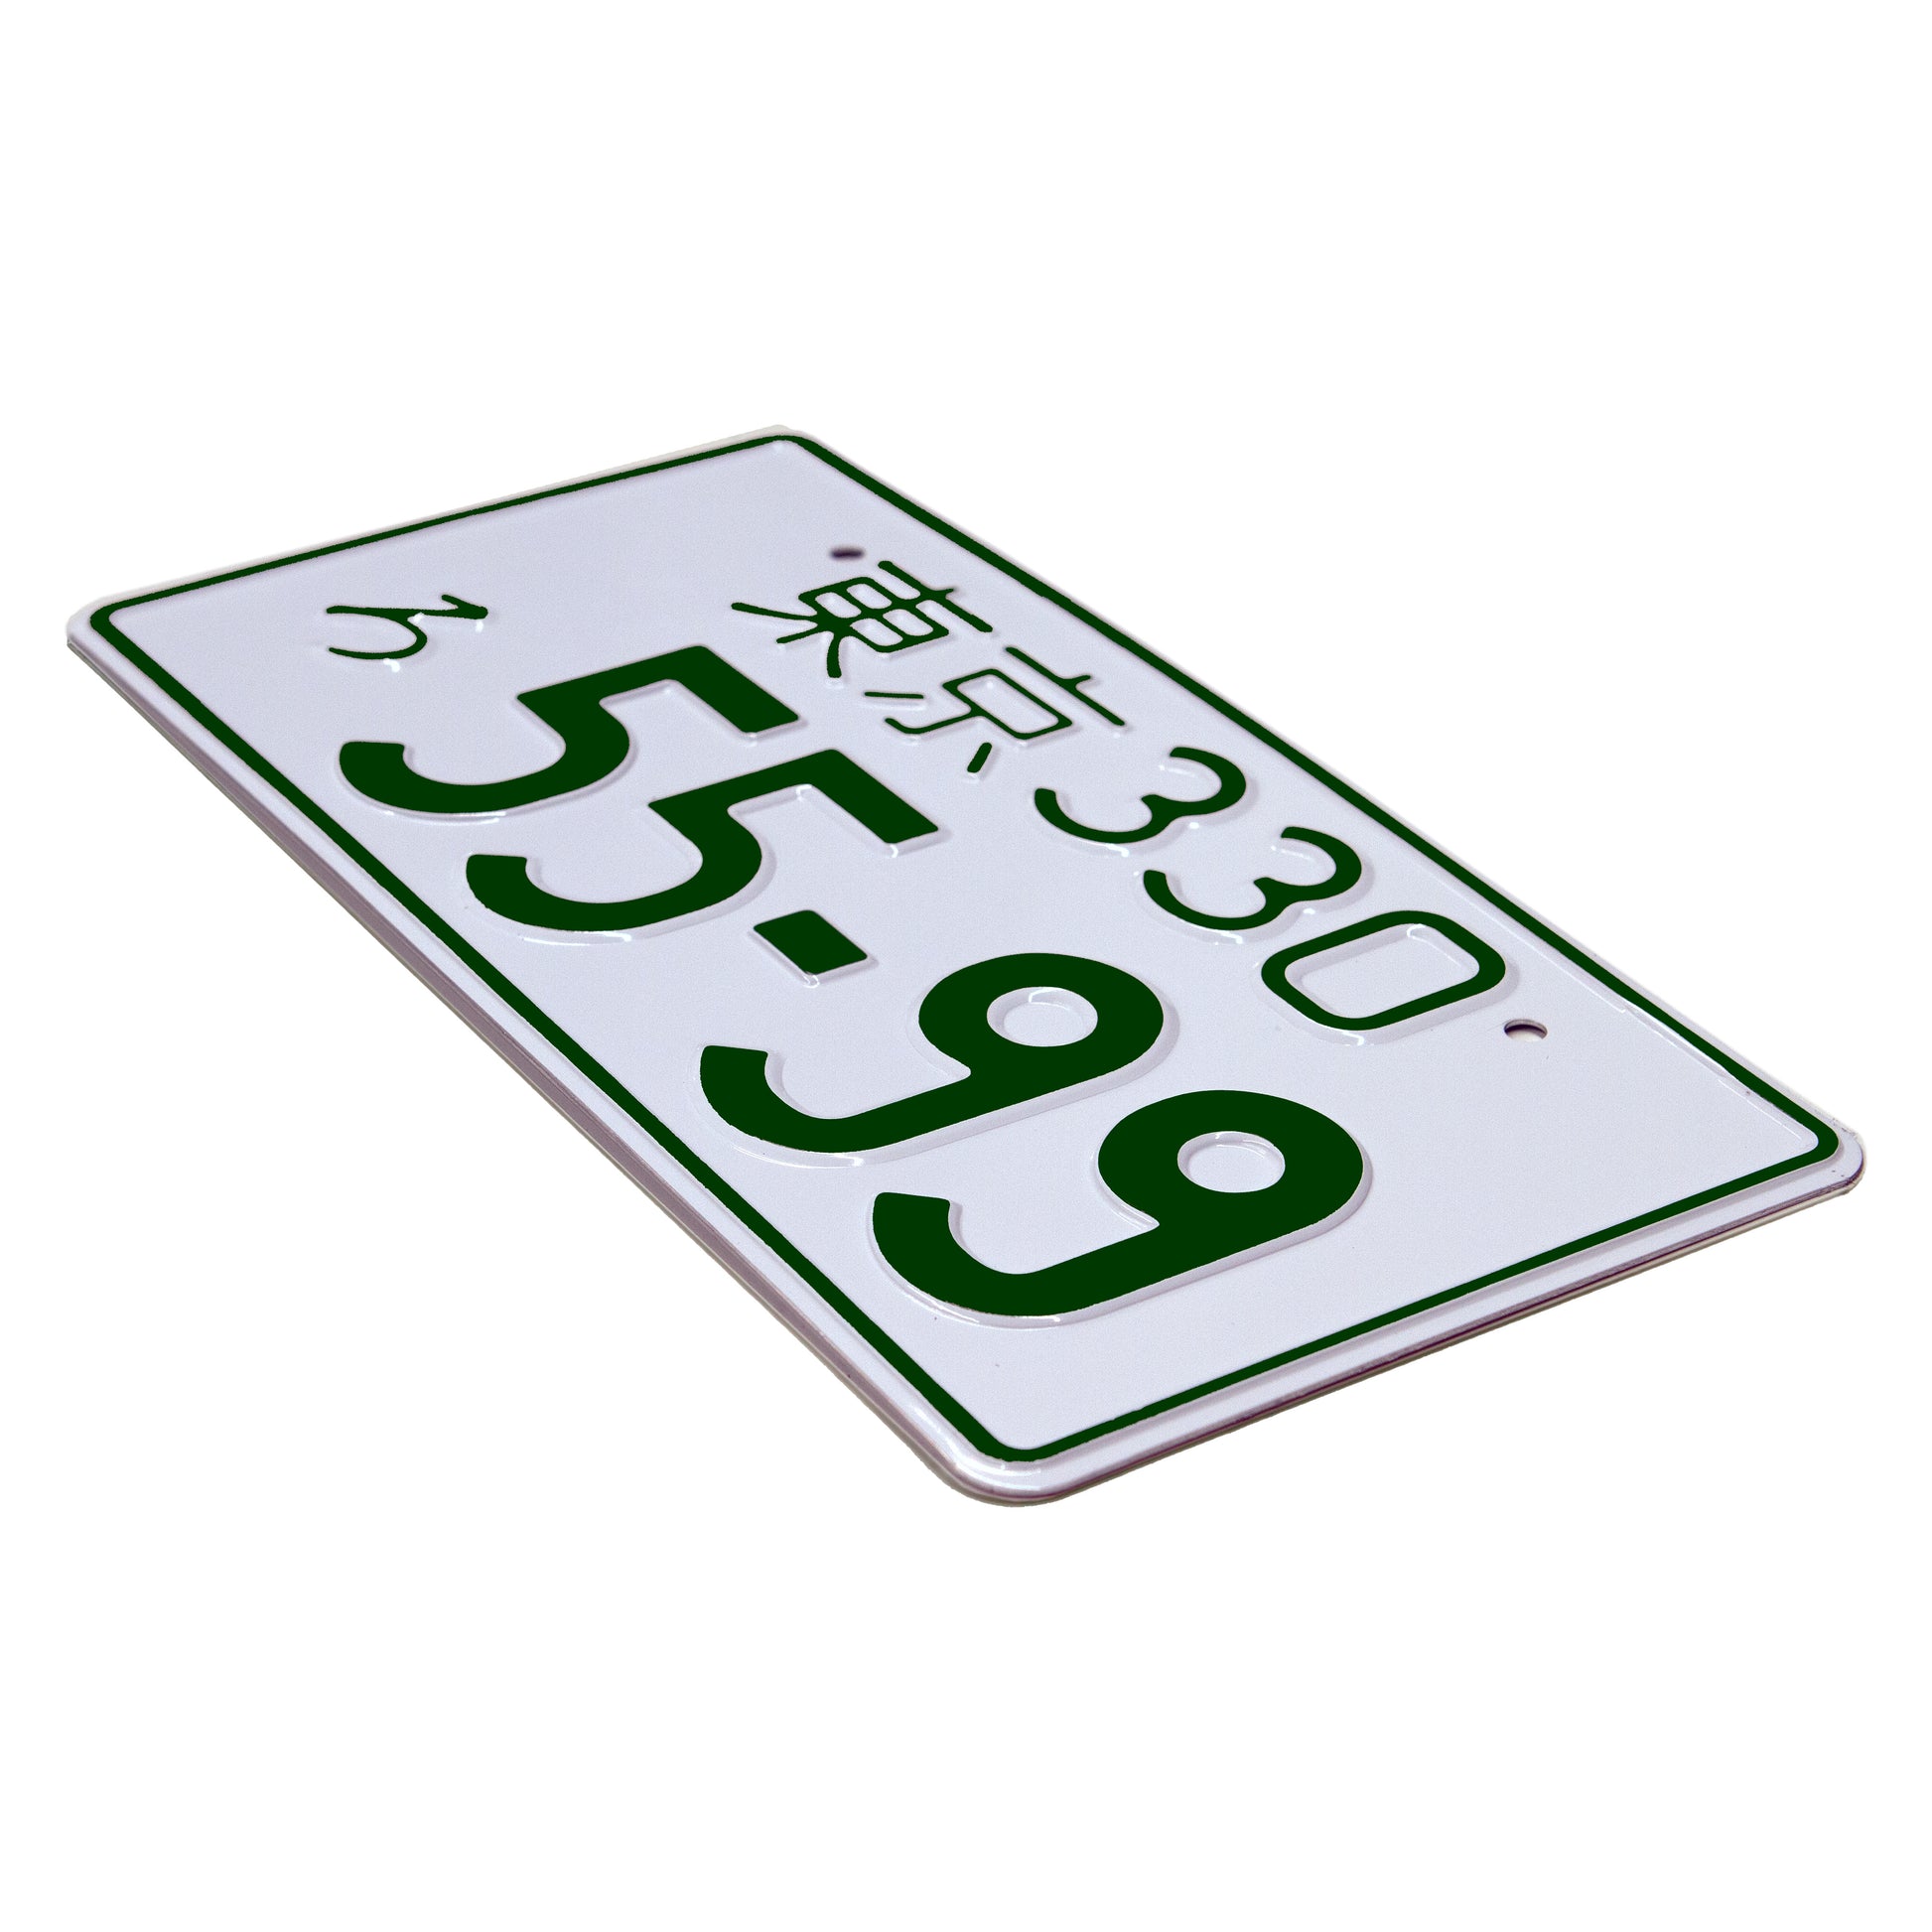 Japanese license plate gloss white with green text angle view